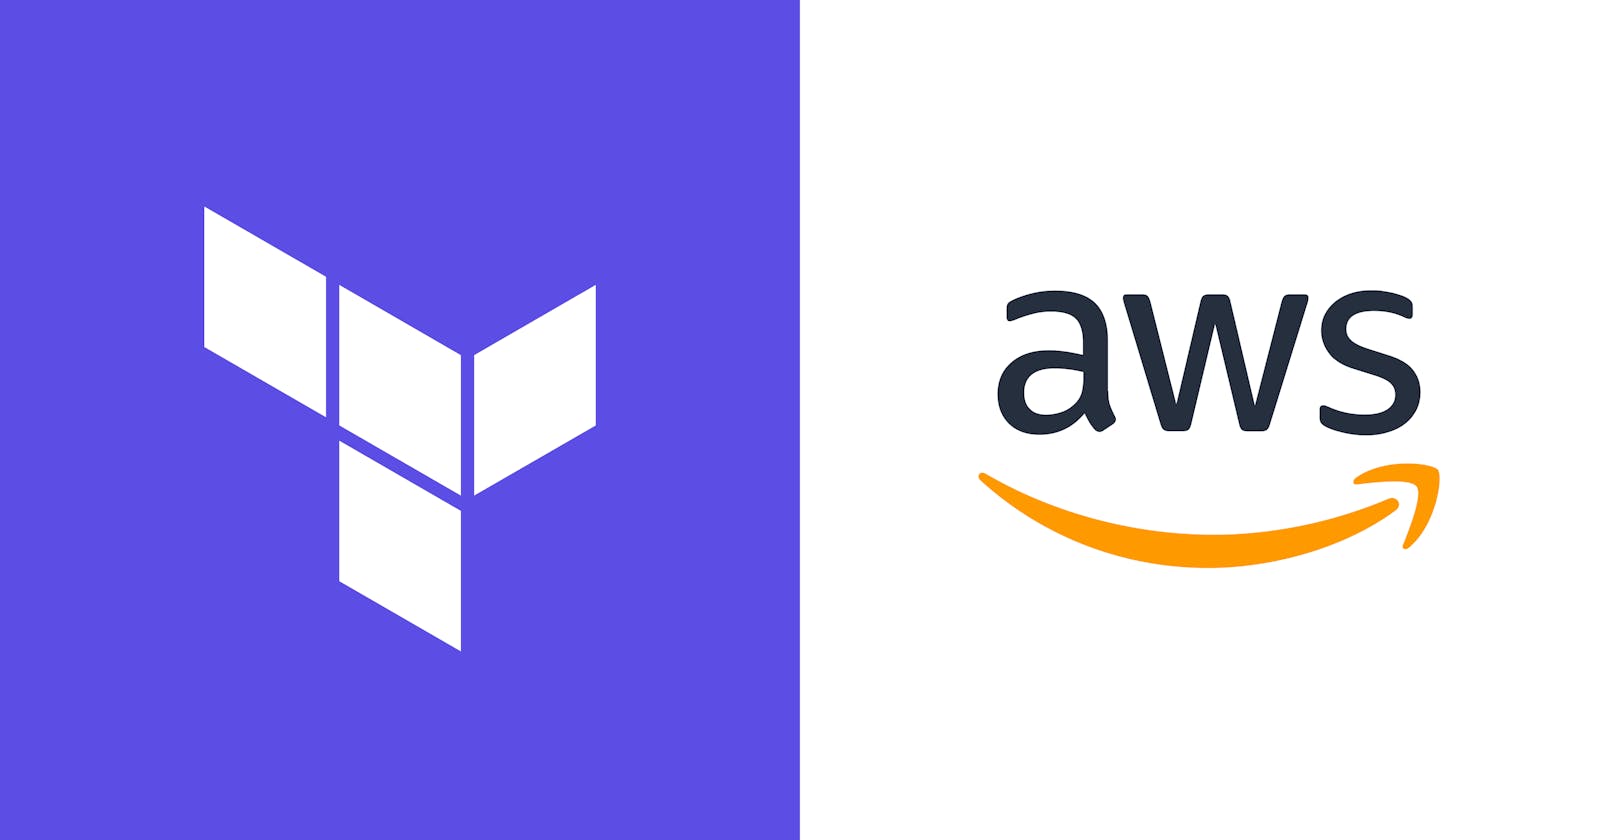 How to deploy a three-tier architecture in AWS using Terraform?